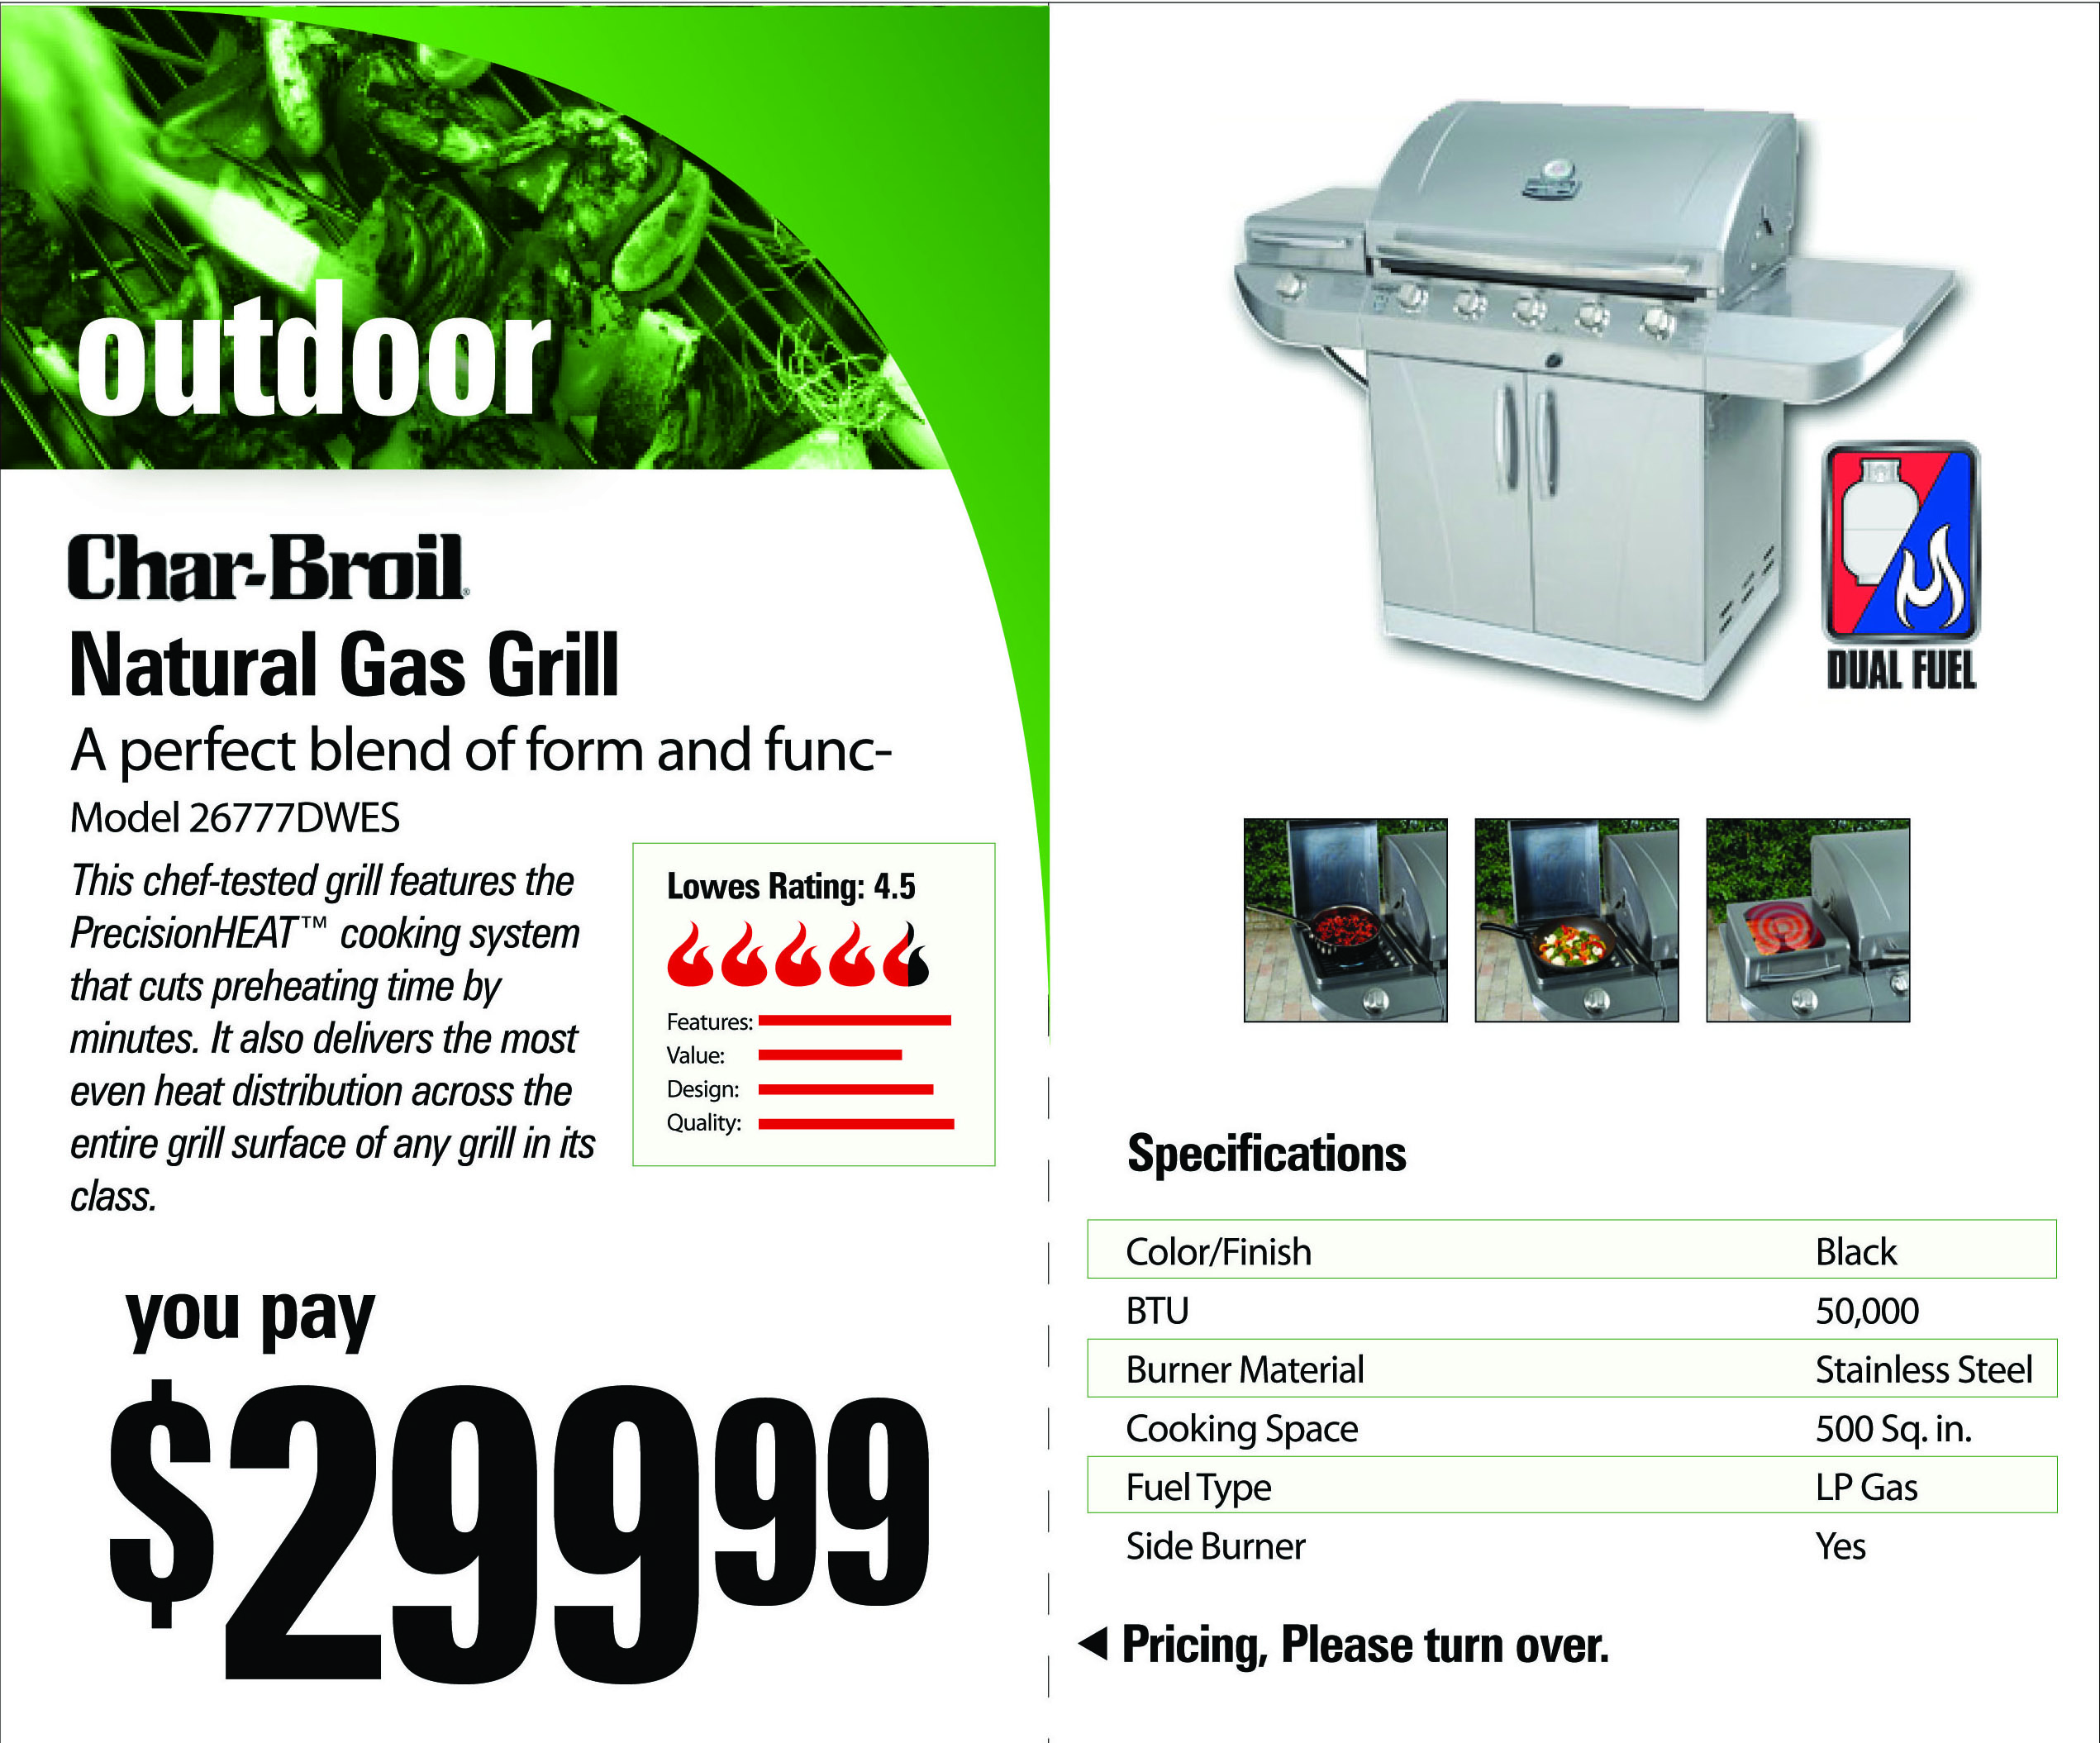 SignIQ ticket for Outdoor - Barbeque with Detailed Product Information